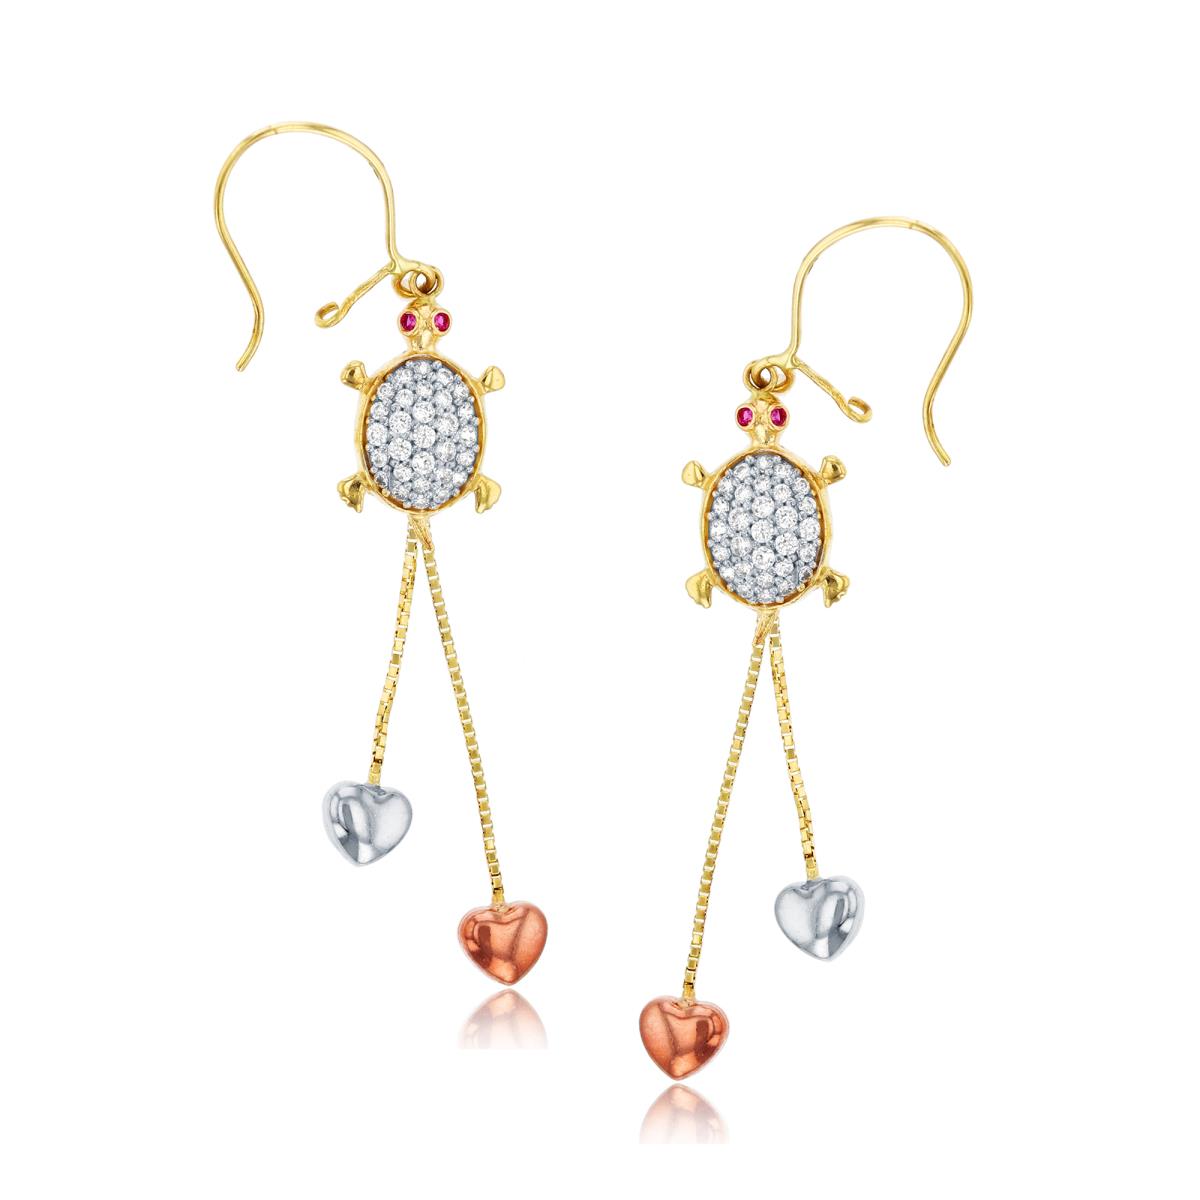 14K Tri-color Gold Turtle Dangling Earring with Cubic Zirconia